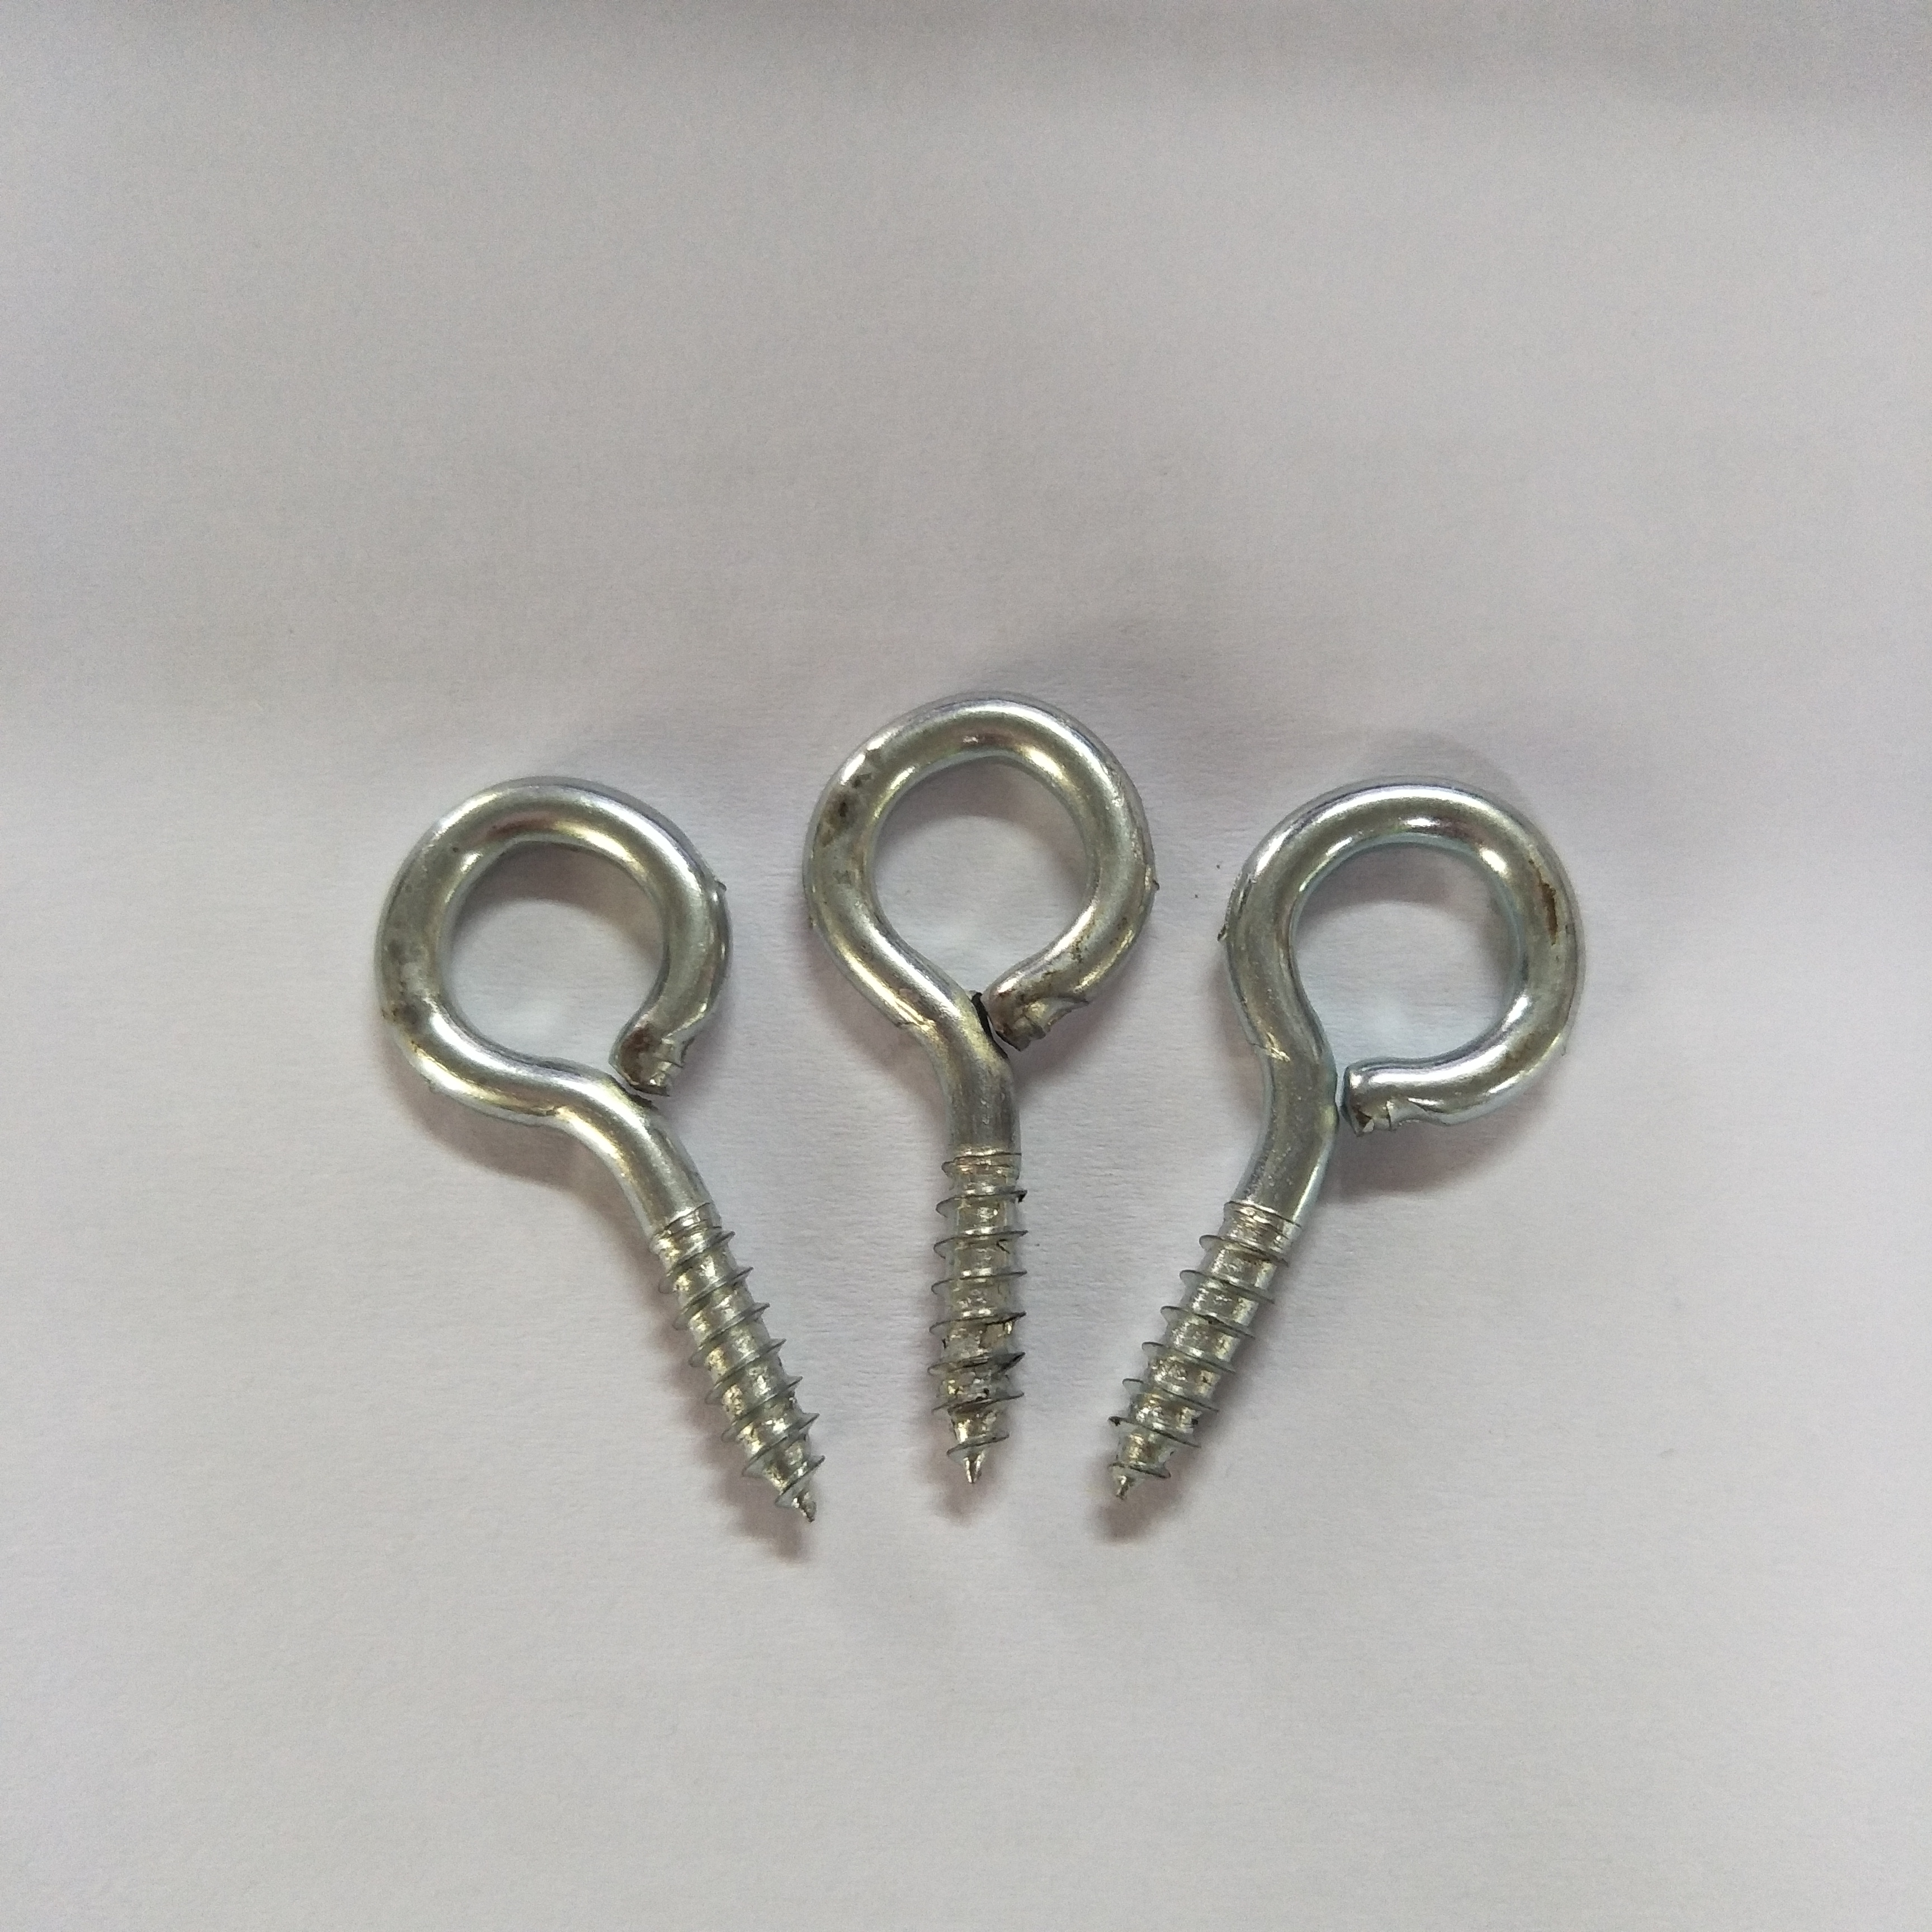 WIRE FORMING HOOK